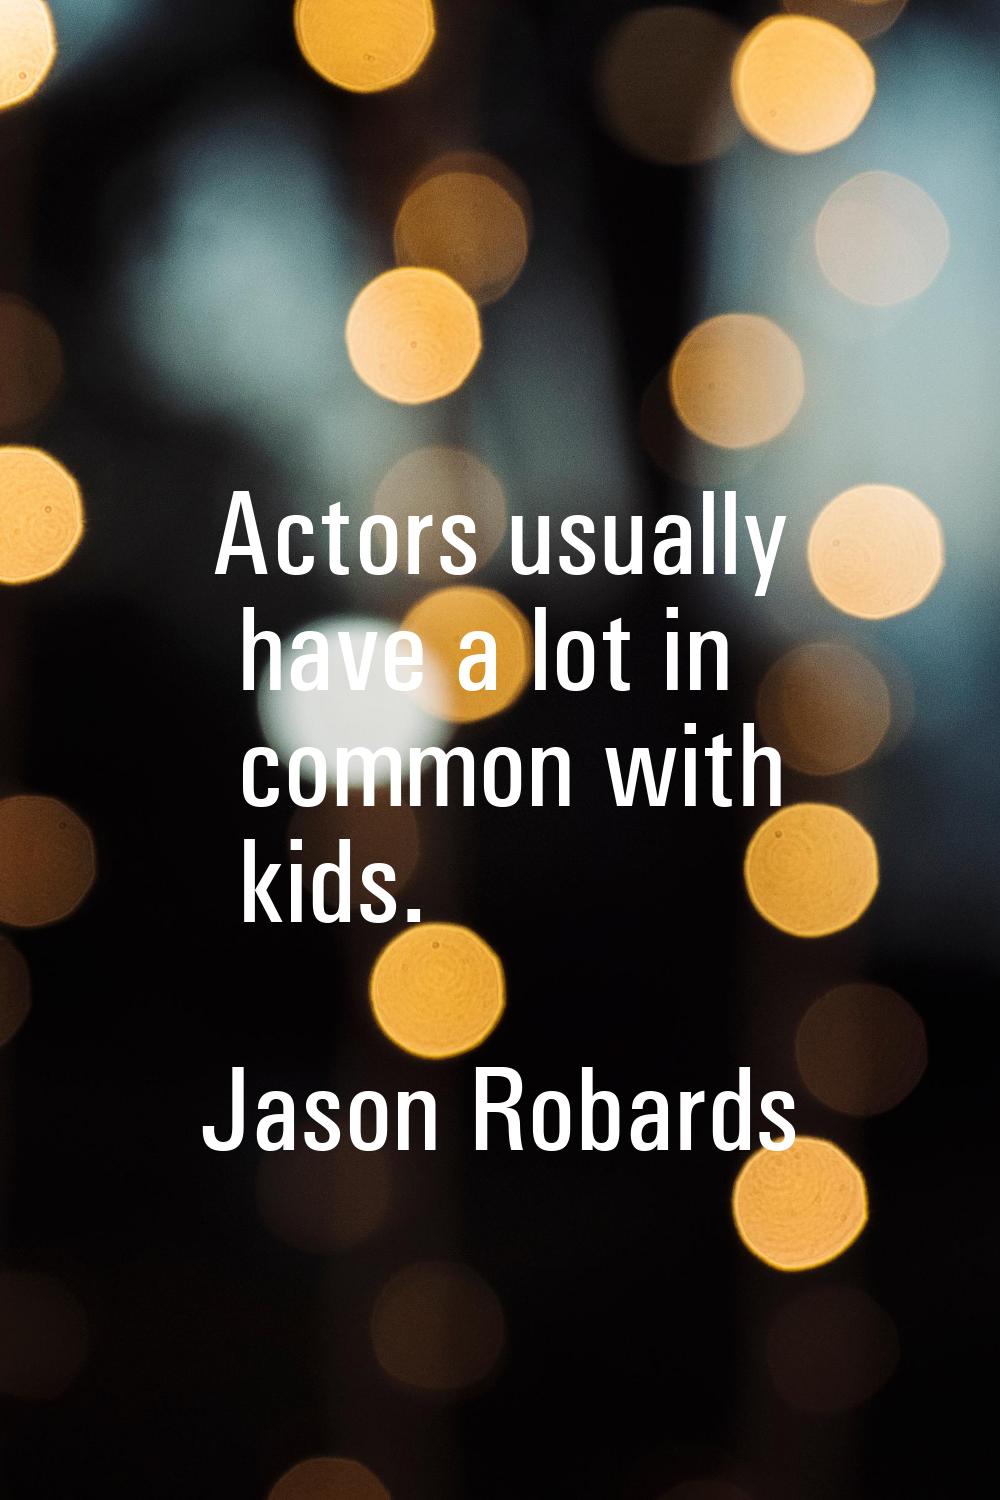 Actors usually have a lot in common with kids.